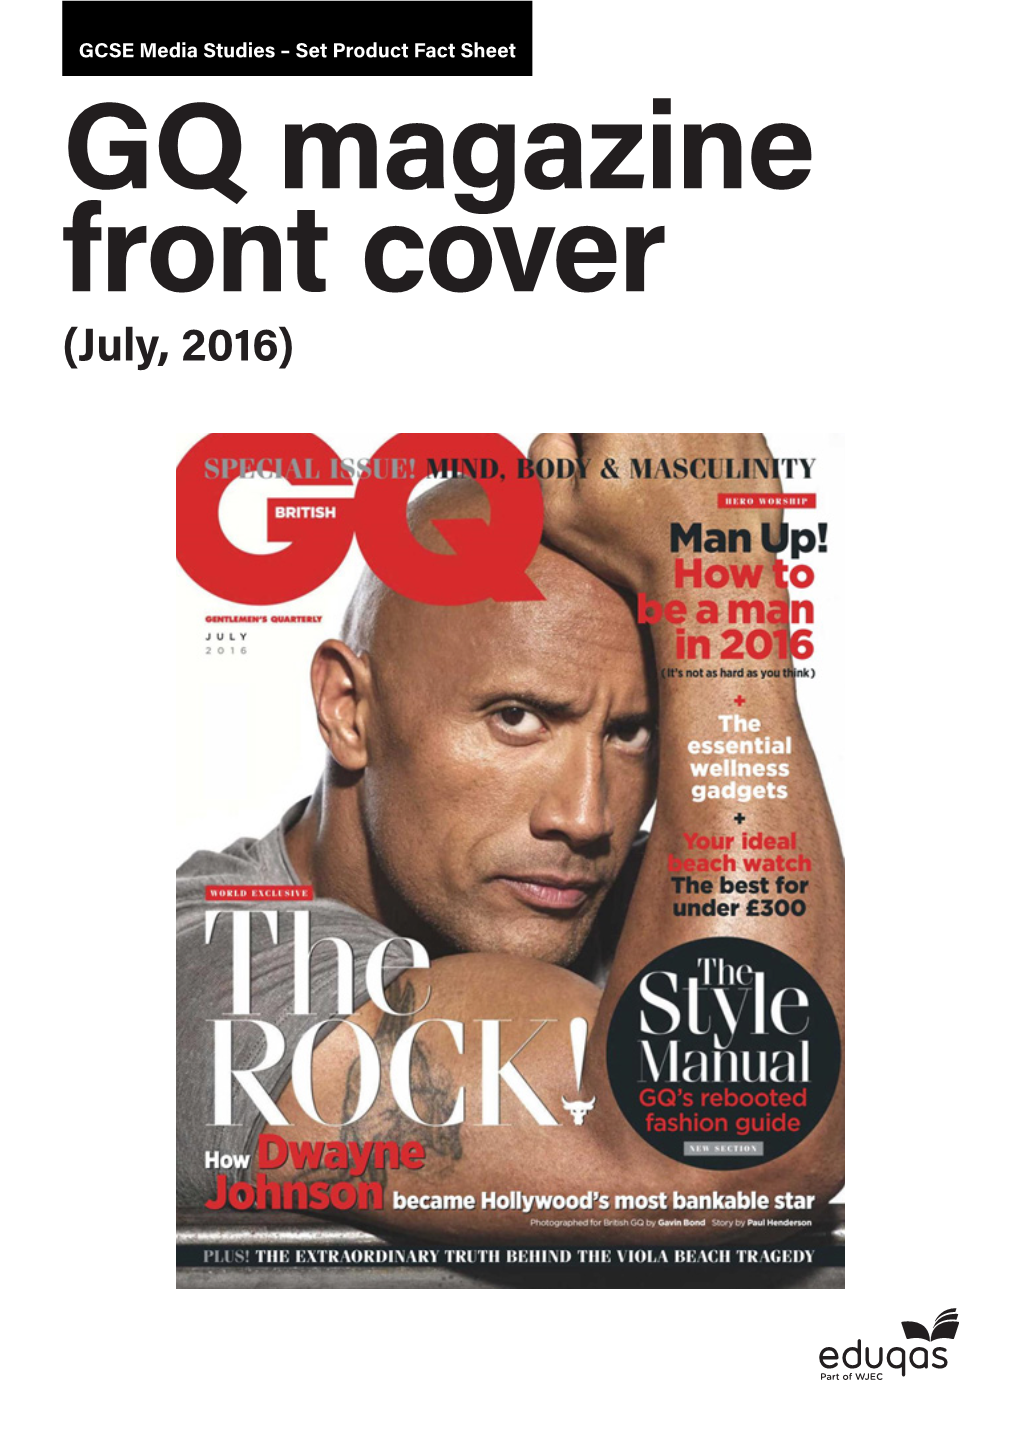 GQ Magazine Front Cover (July, 2016) GCSE Media Studies – Set Product Fact Sheet GQ Magazine Front Cover (July, 2016)